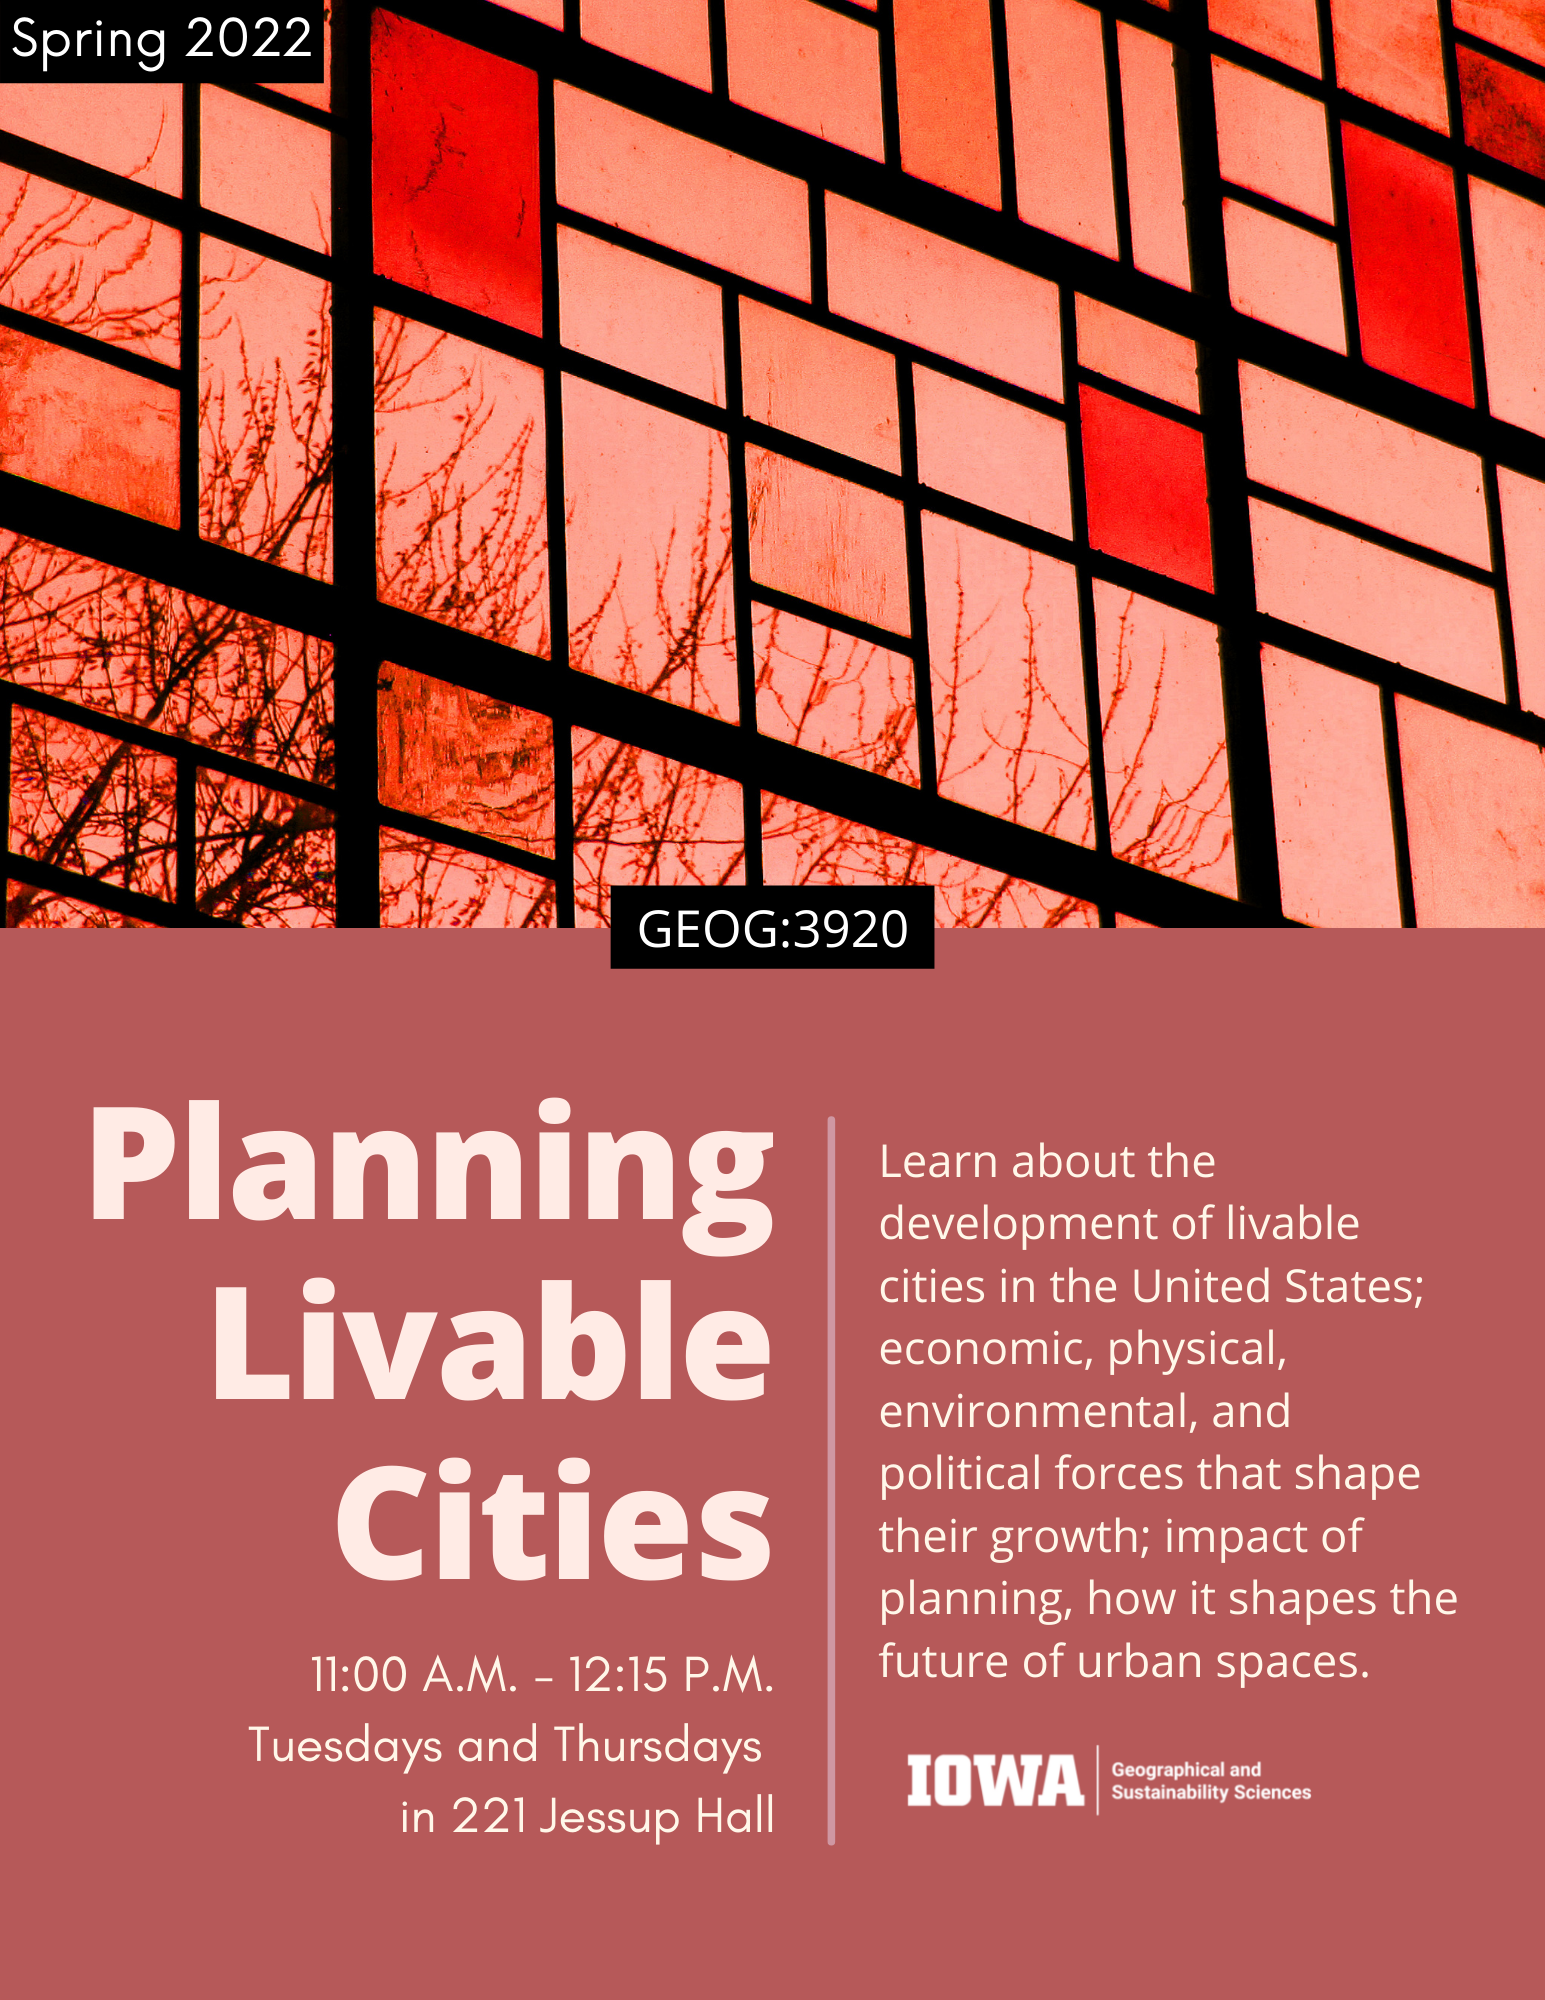 A course poster advertising Planning Livable Cities